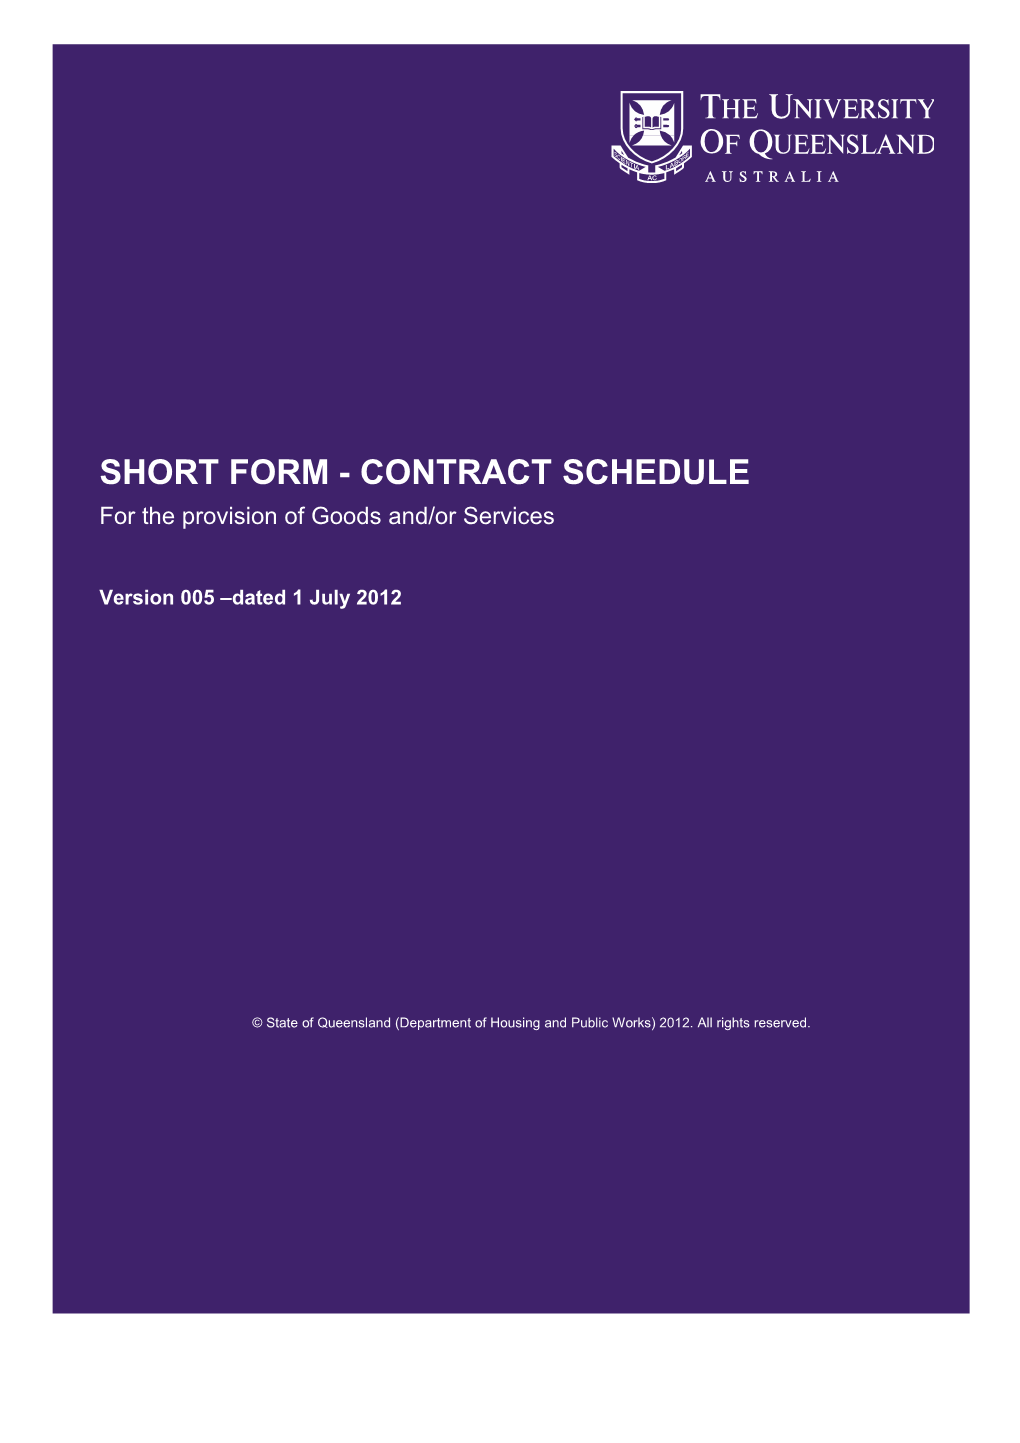 Short Form - Contract Schedule: for the Provision of Goods And/Or Services - Version 005